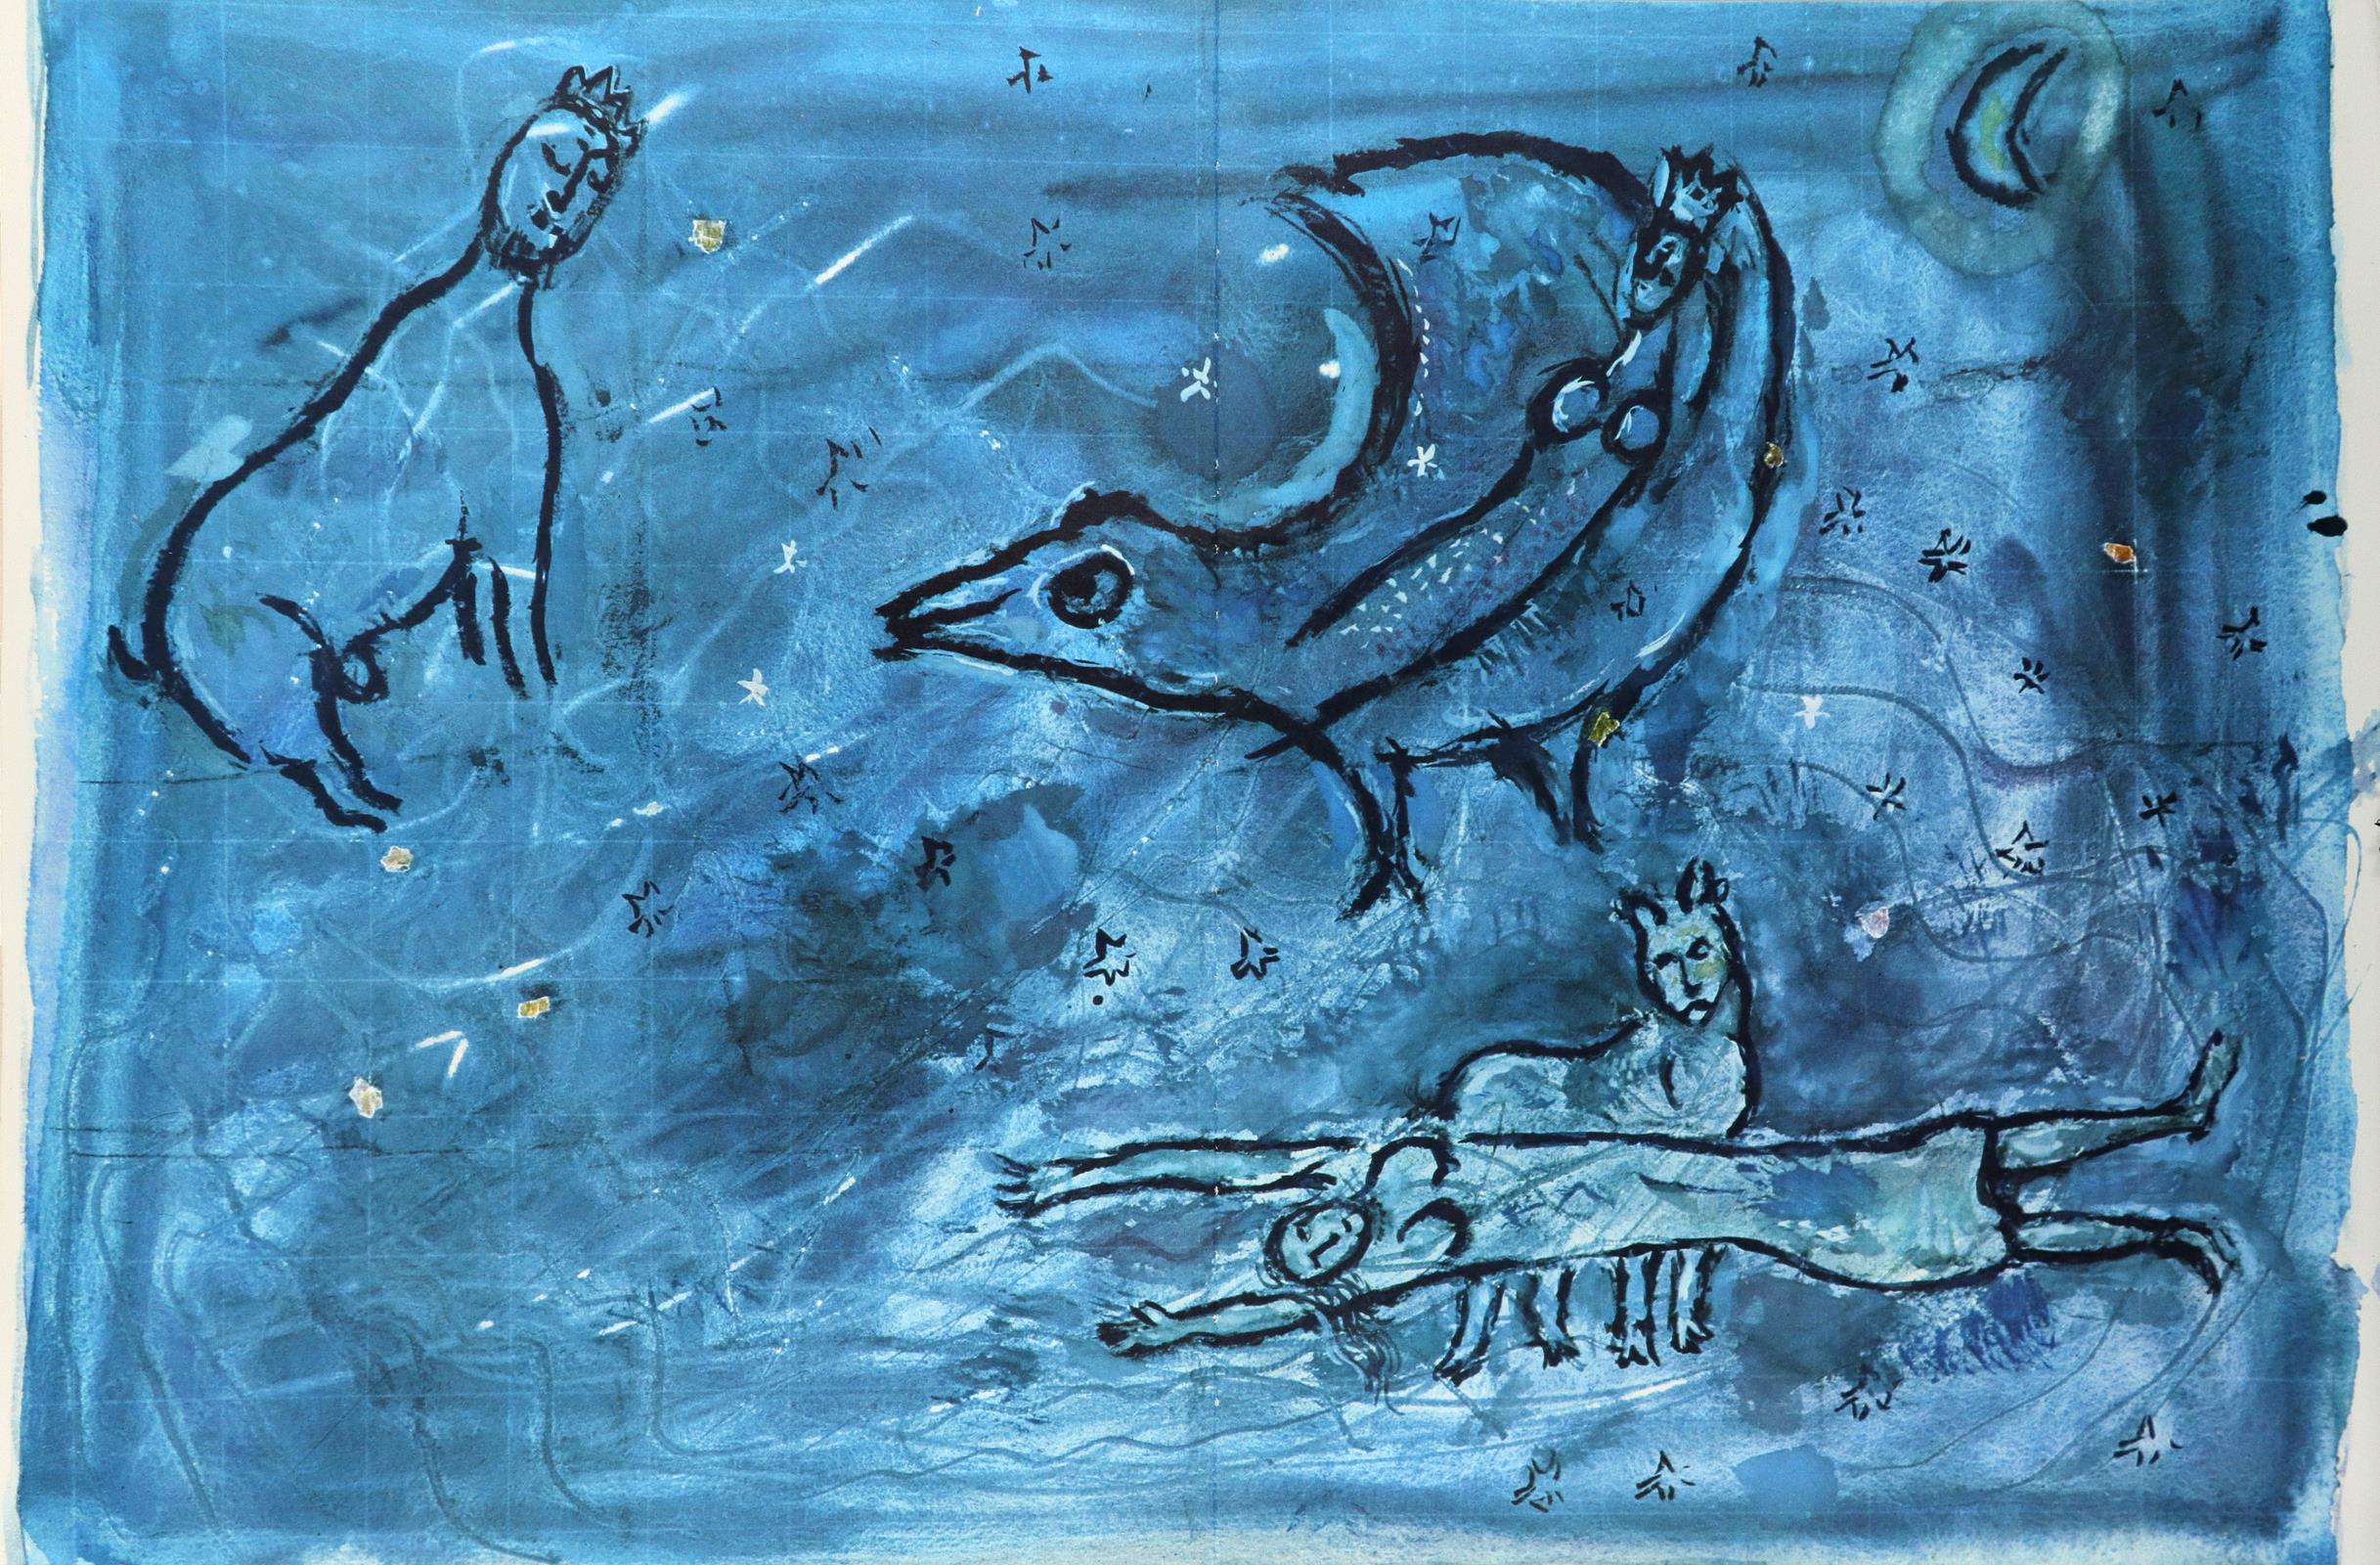 ‡Marc Chagall (Russian/French 1887-1985) Tables of the law Lithograph, 1962 32.5 x 24.4cm Unframed - Image 3 of 6